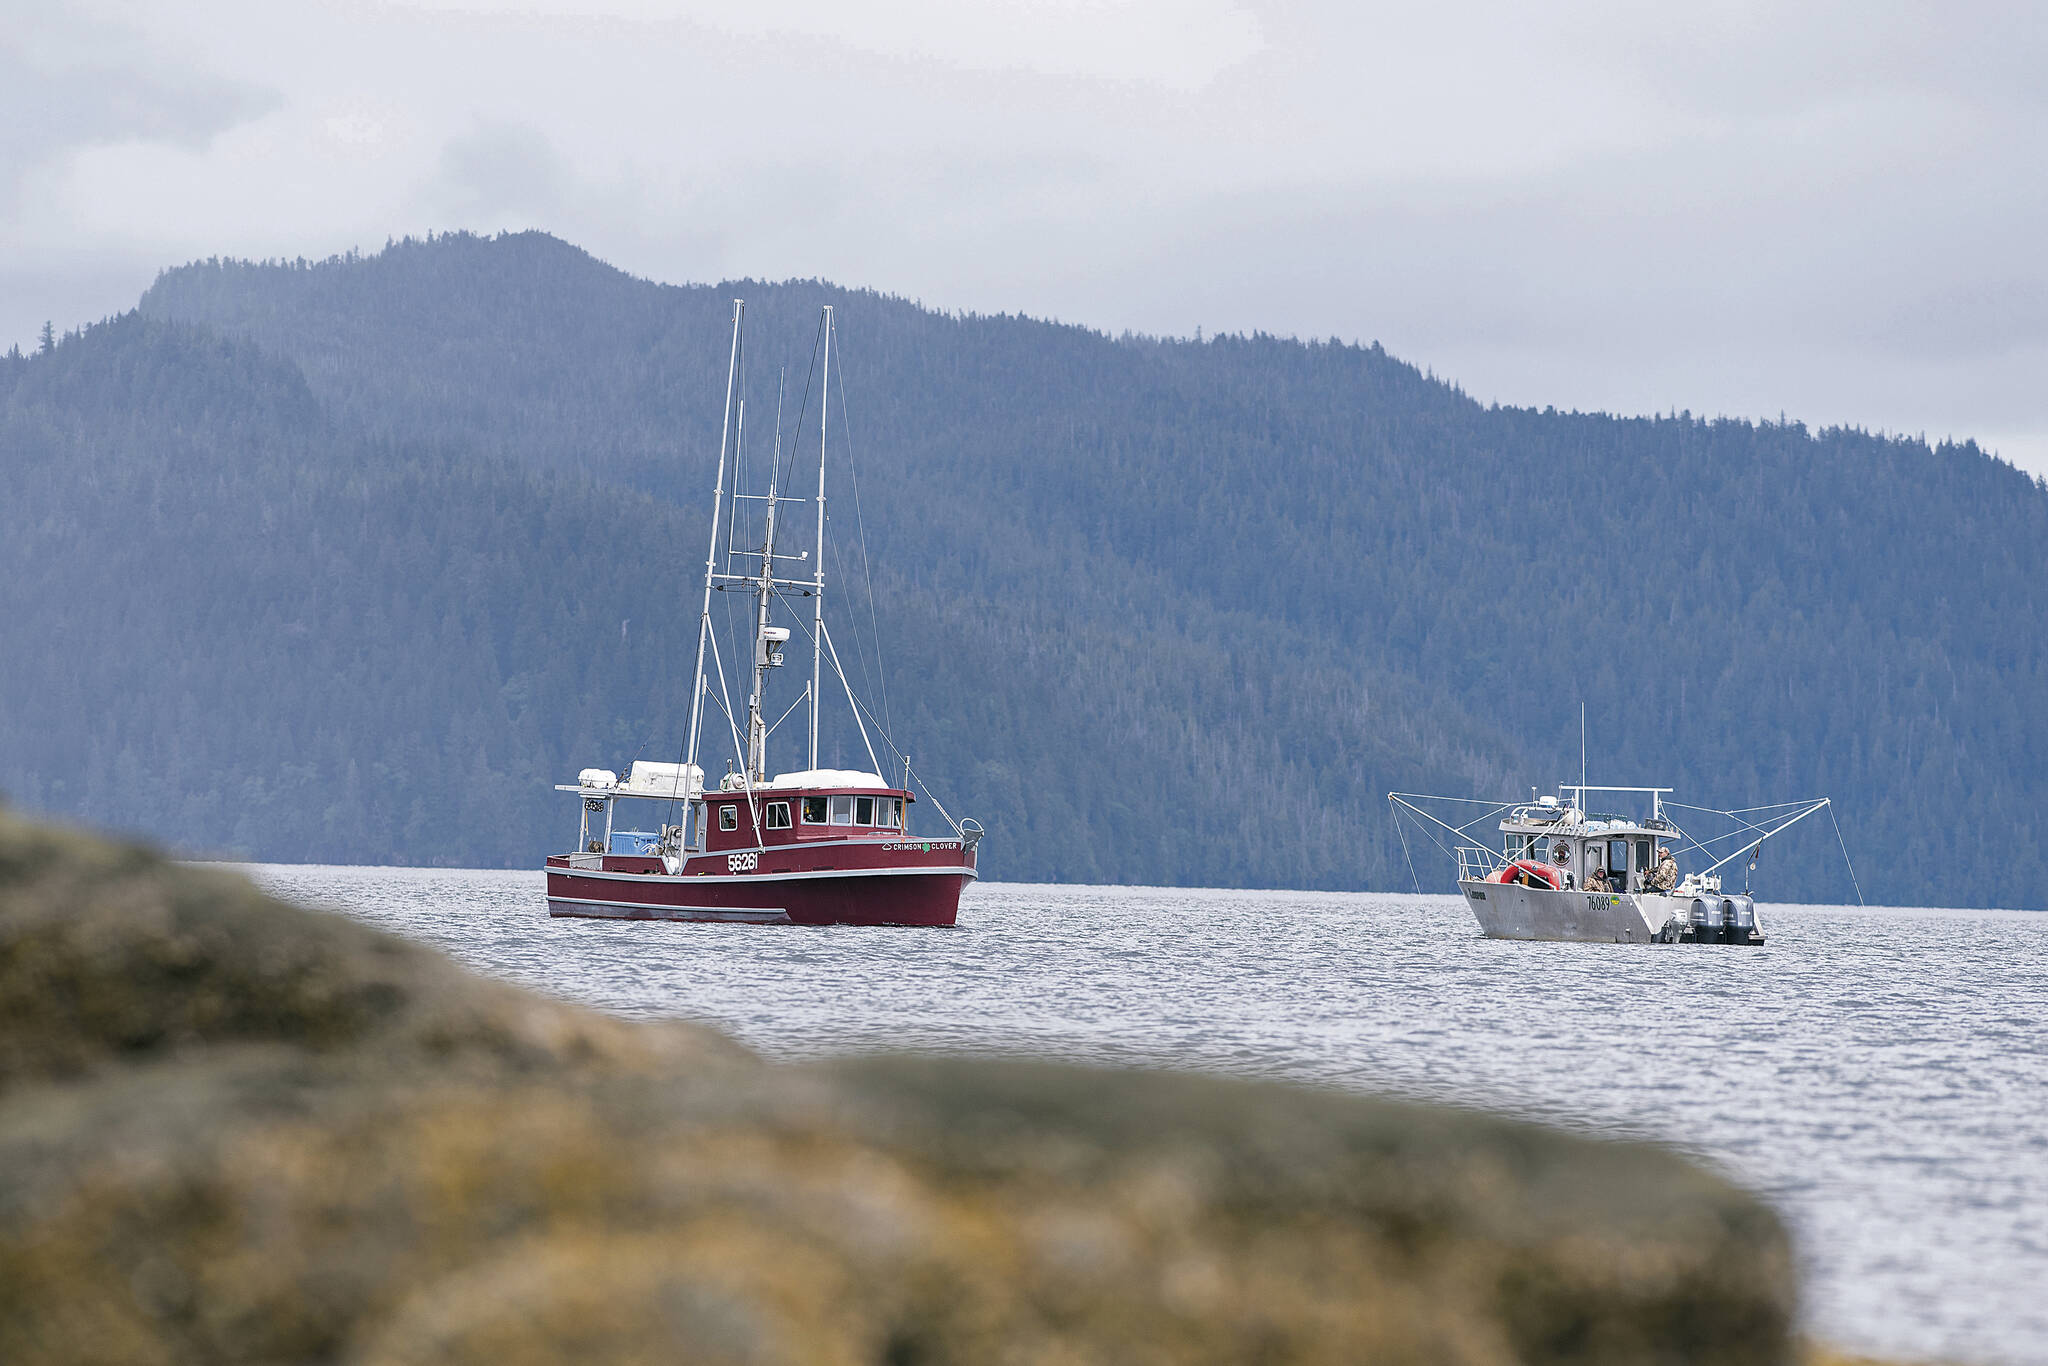 Two commercial troll fishing boats pass each other on June 2, 2020, at Mountain Point in Ketchikan, Alaska. A U.S. appeals court on Wednesday, June 21, 2023, halted a lower court ruling that would have shut down southeast Alaska’s chinook salmon fishery for the summer to protect endangered orca whales that eat the fish. (Dustin Safranek/Ketchikan Daily News via AP, File)